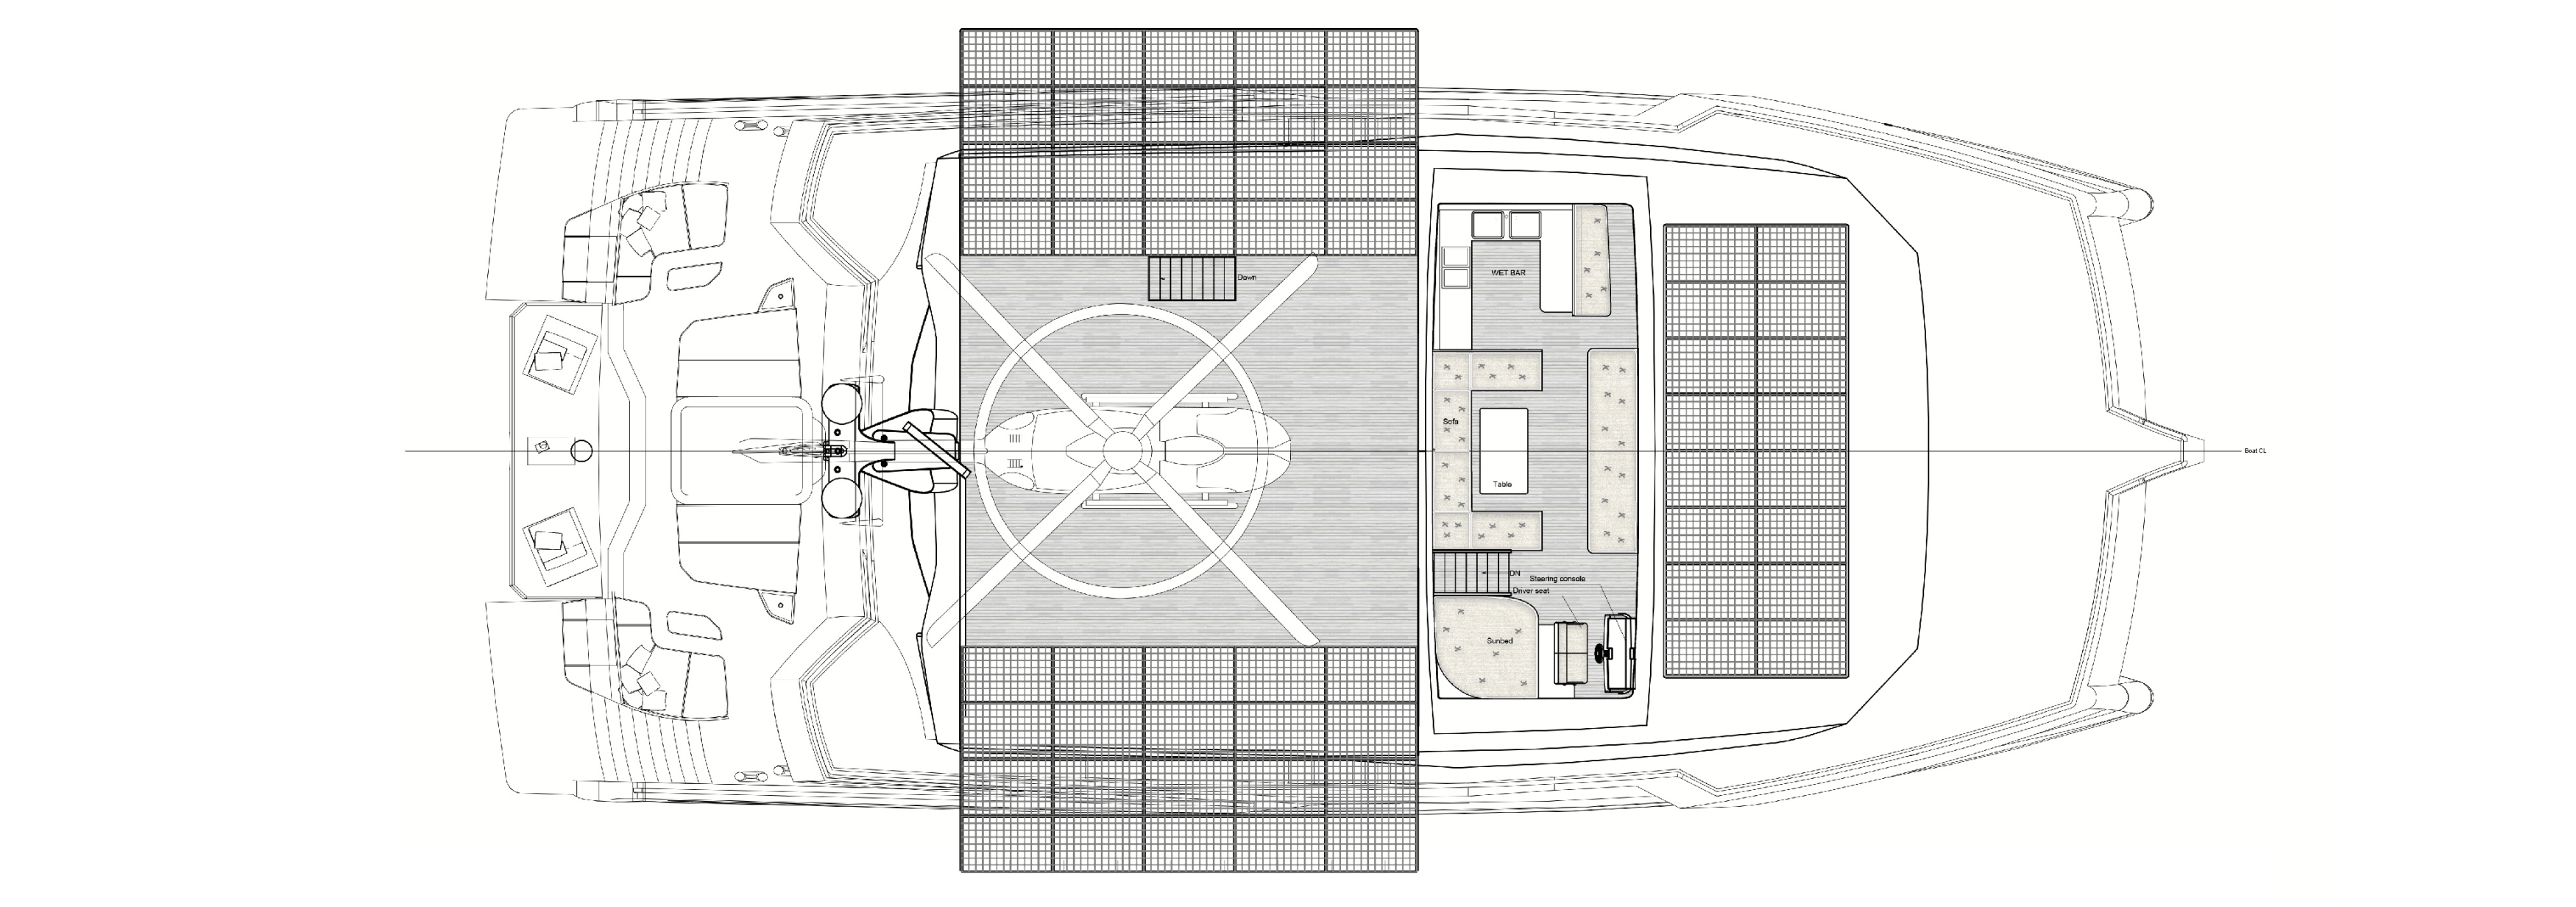 flybrifge helipad plan of a Silent 120 yacht